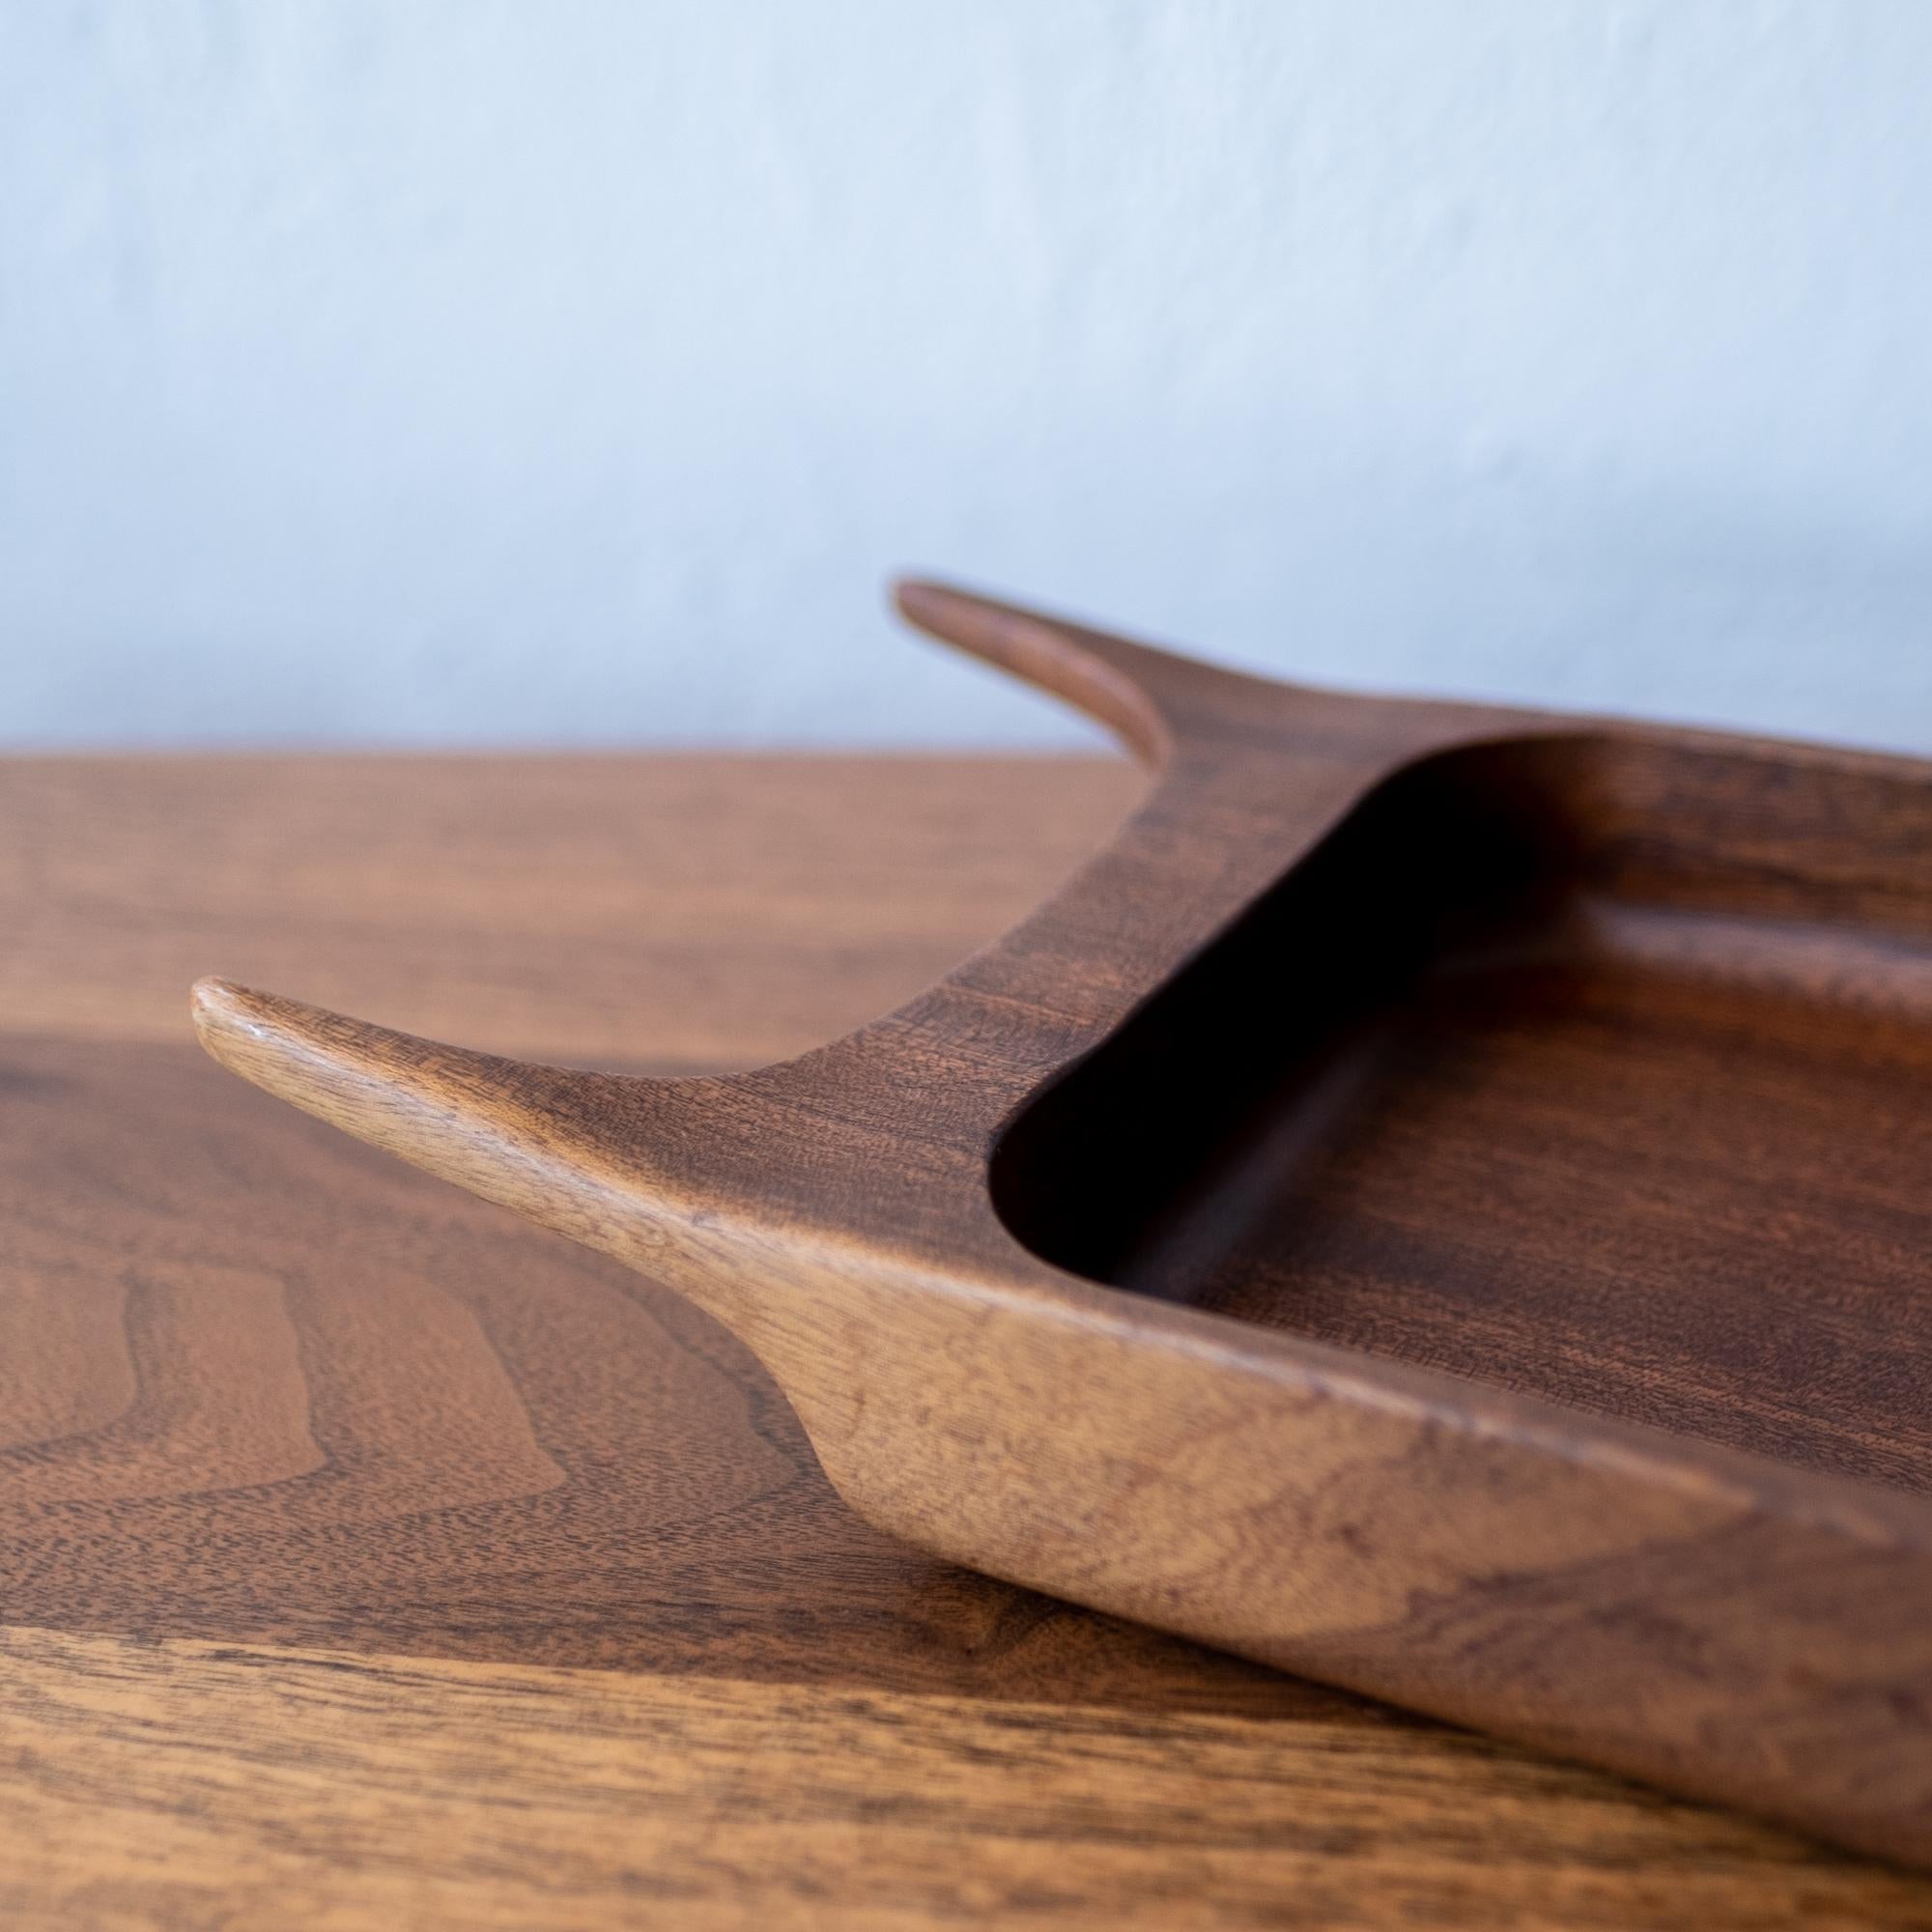 Teak Sculptural Midcentury Italian Wood Bowl or Catch All by Anri, 1950s